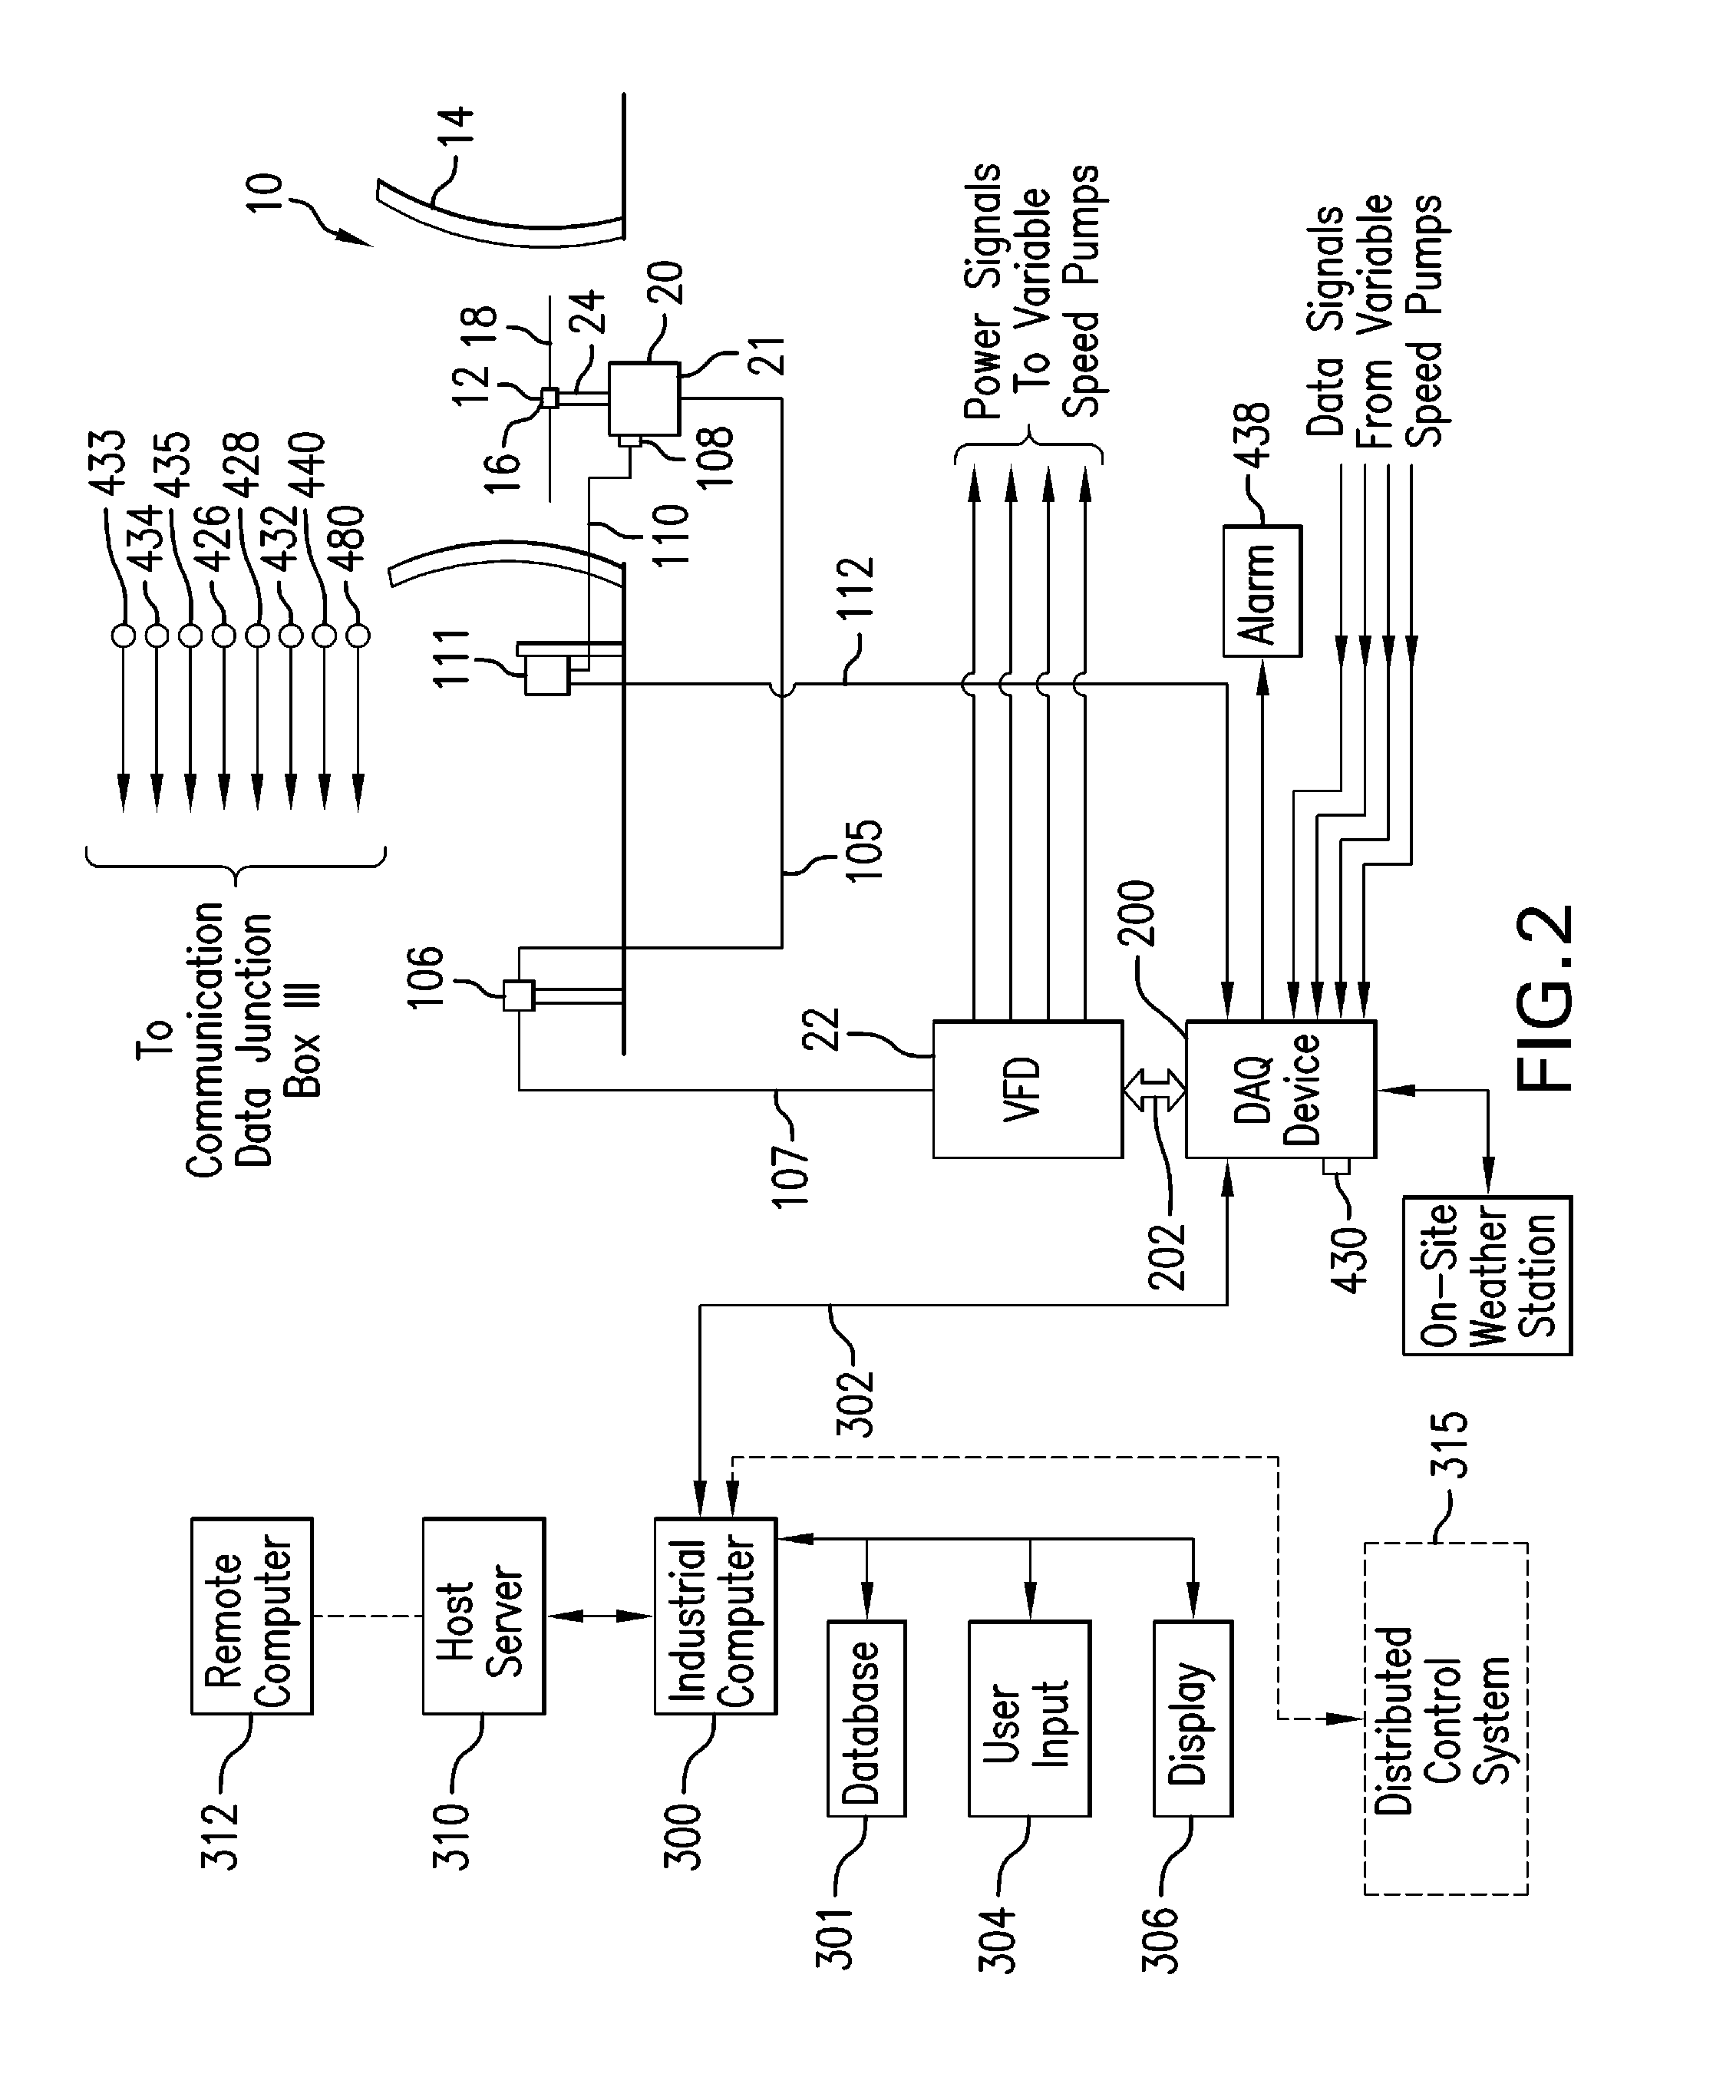 Direct drive fan system with variable process control